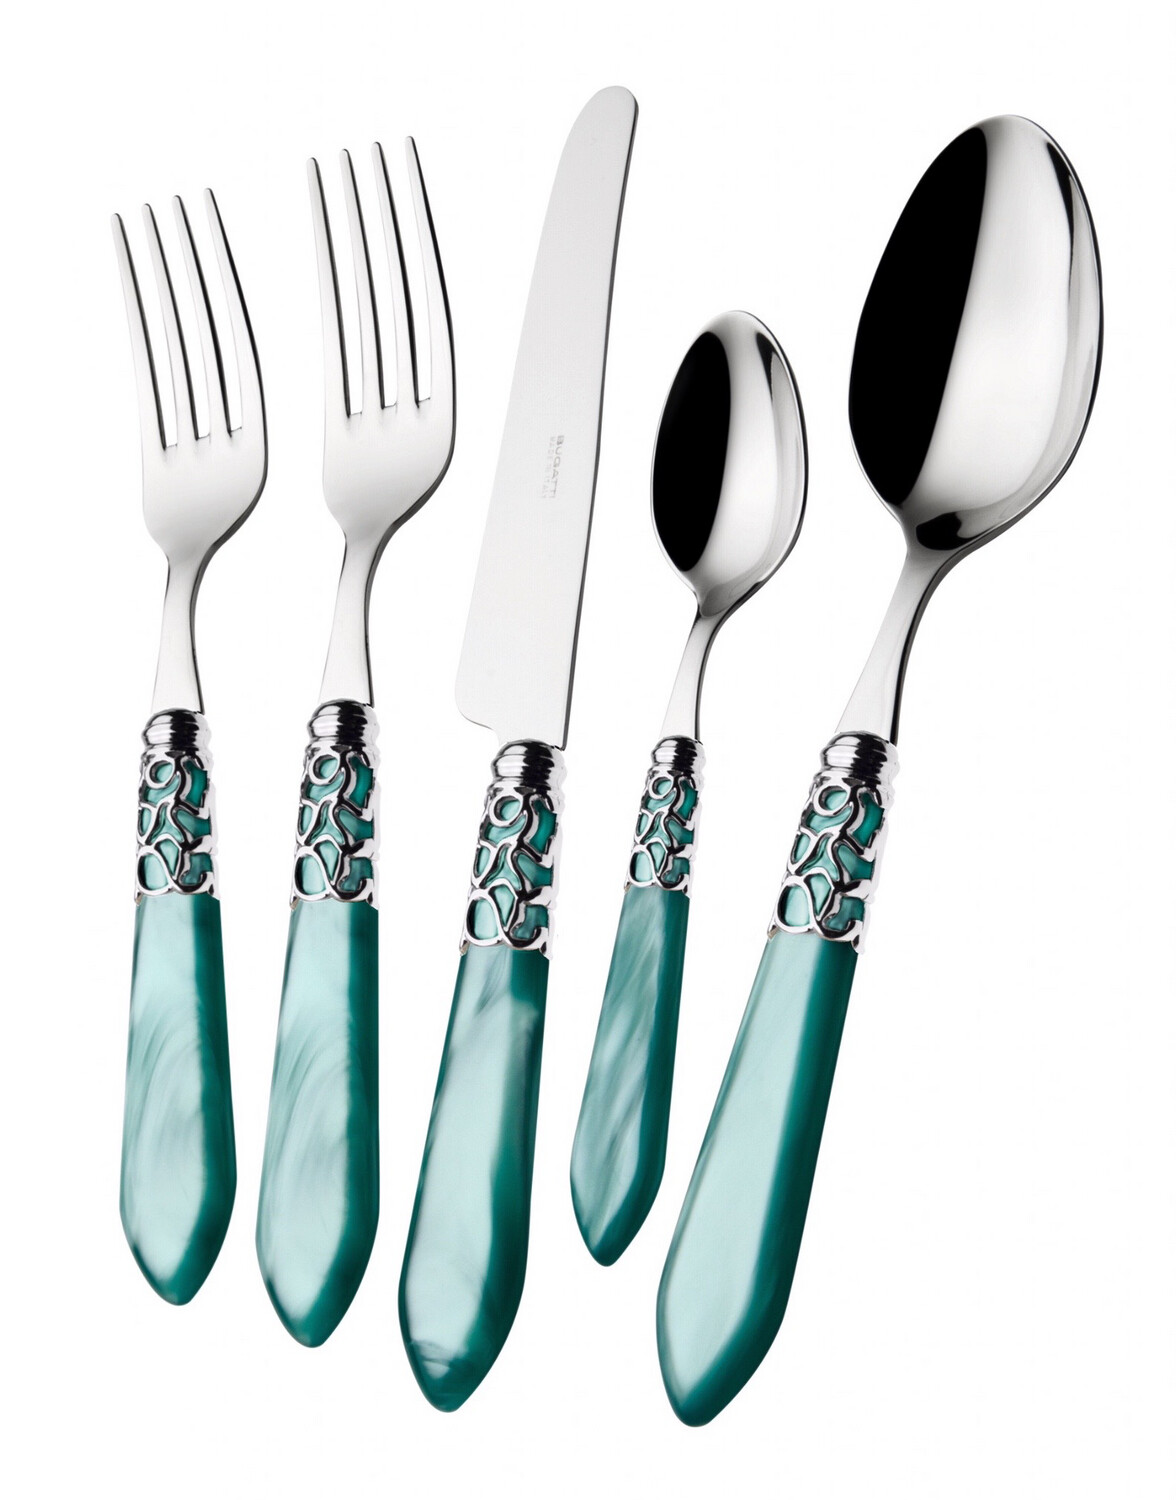 Melodia Brilliant 5 Piece Place Setting turquoise 